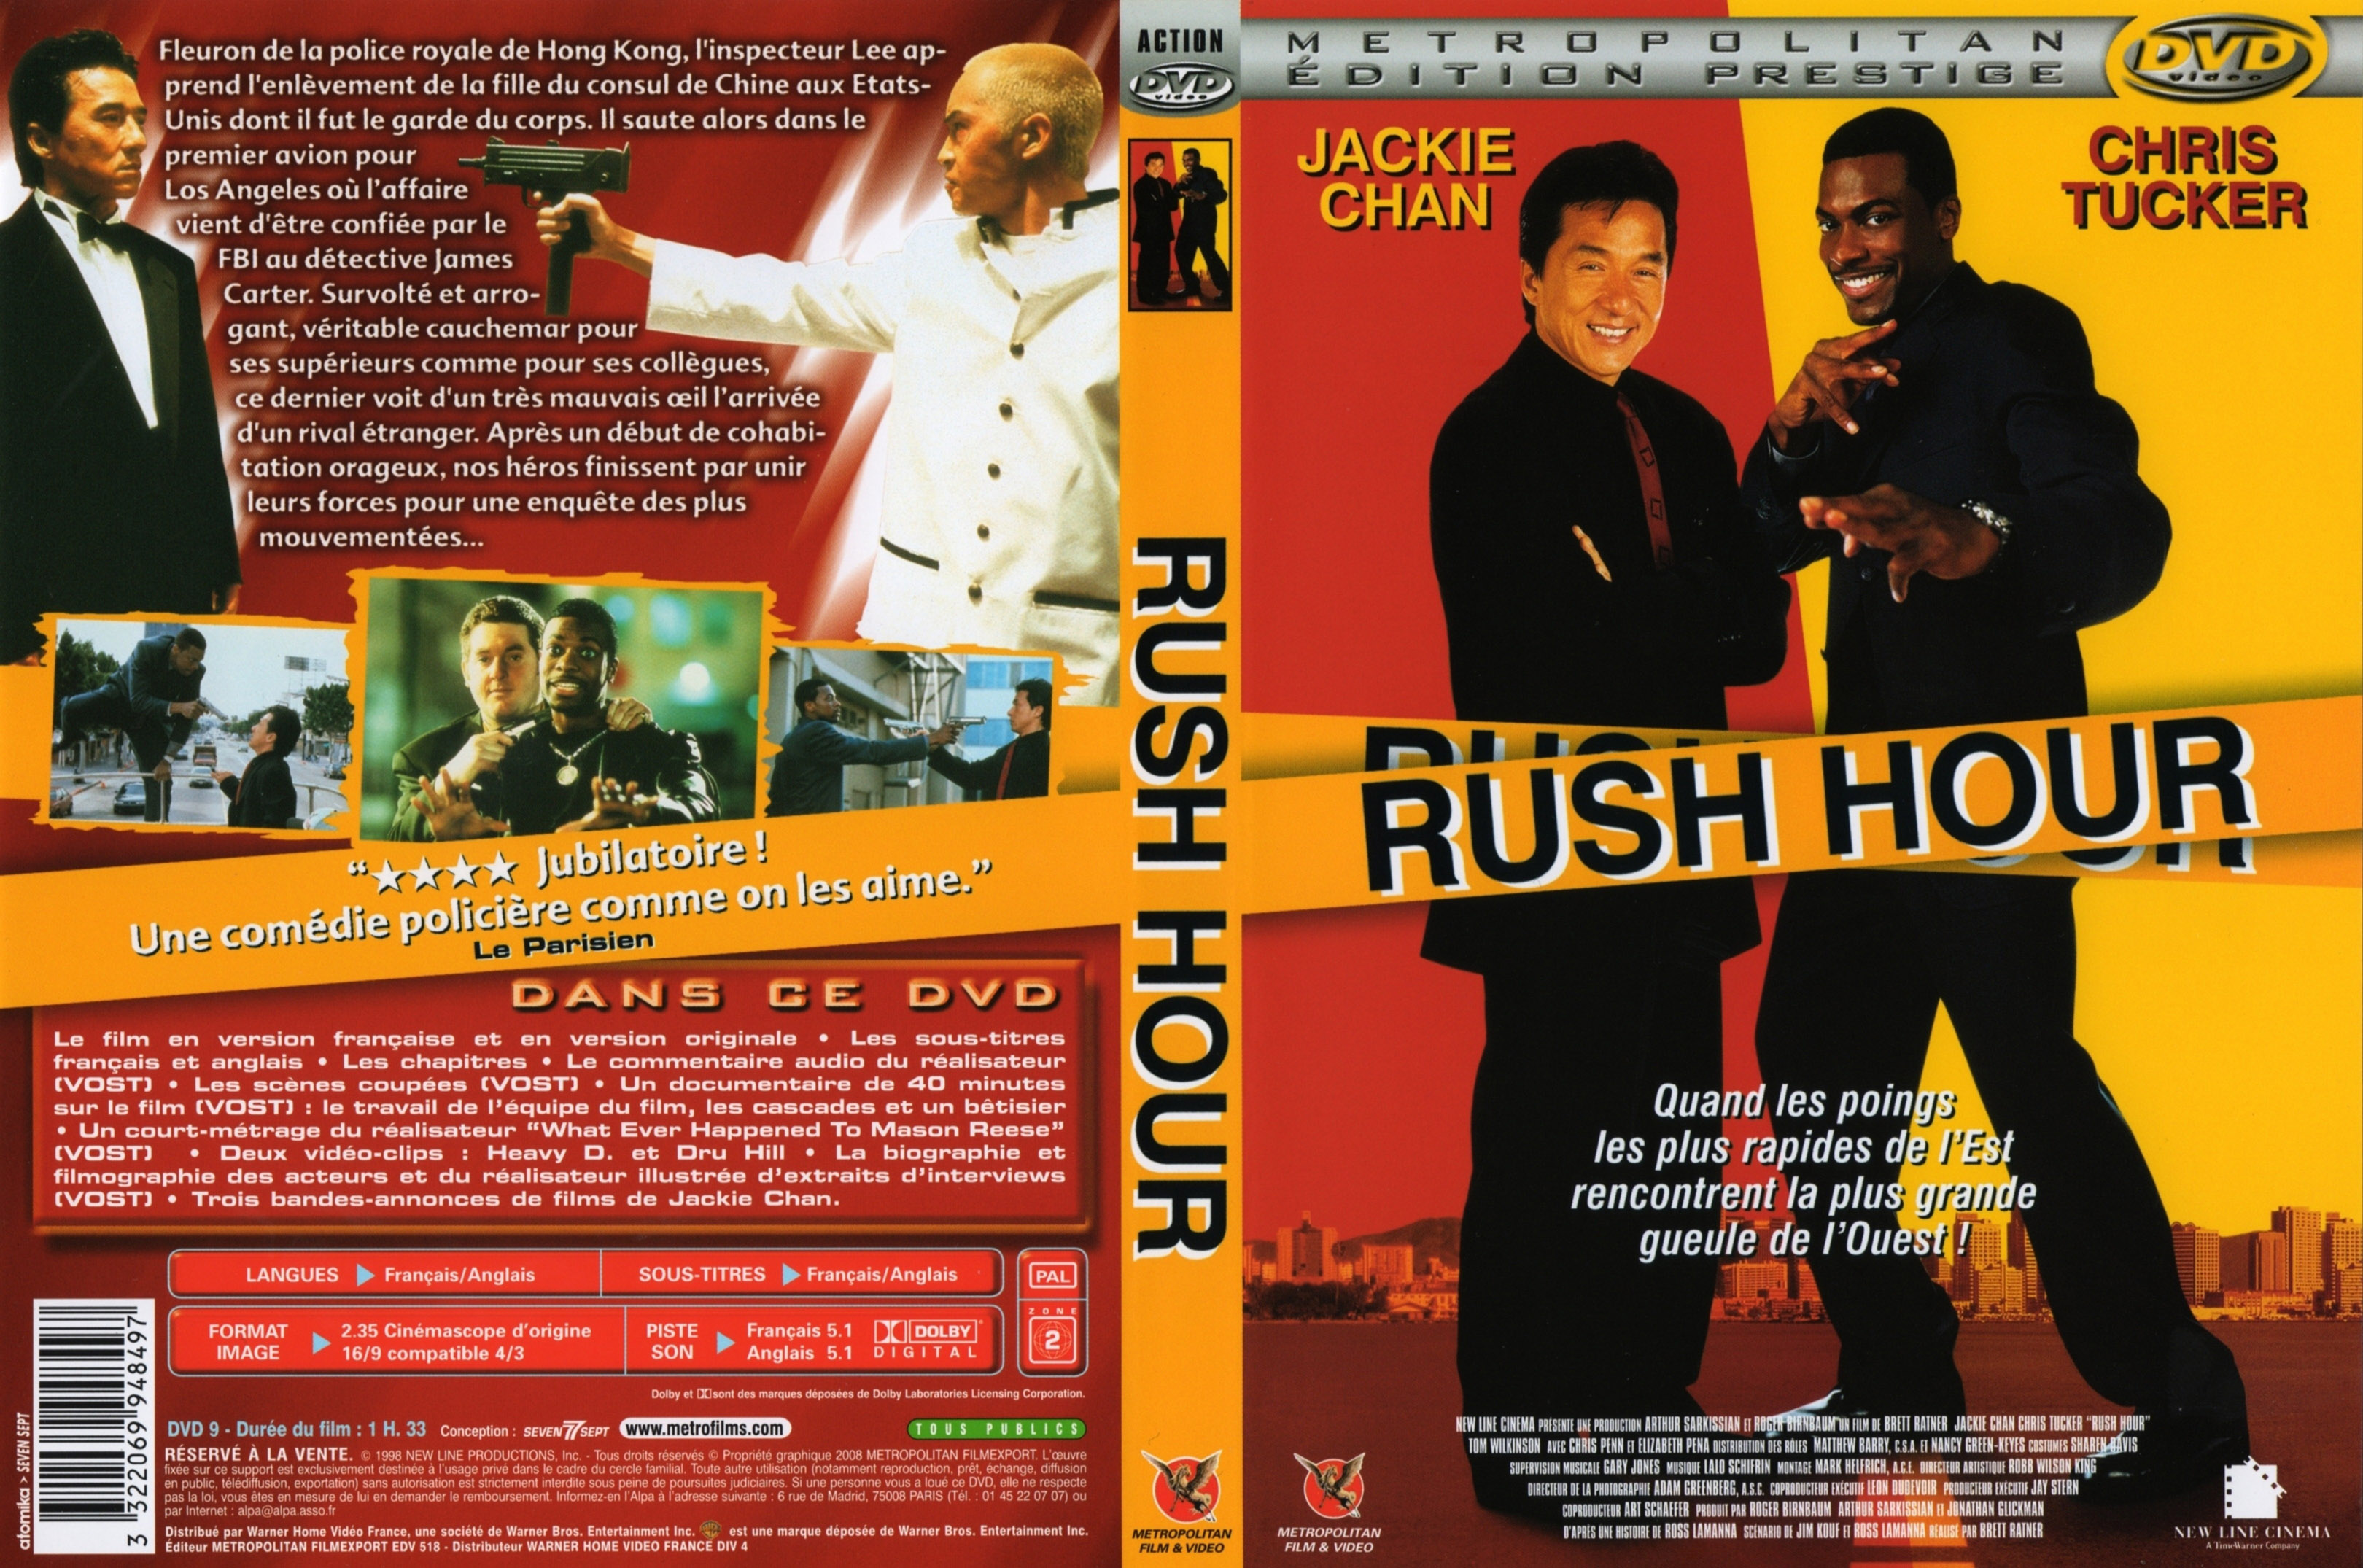 Jaquette DVD Rush hour